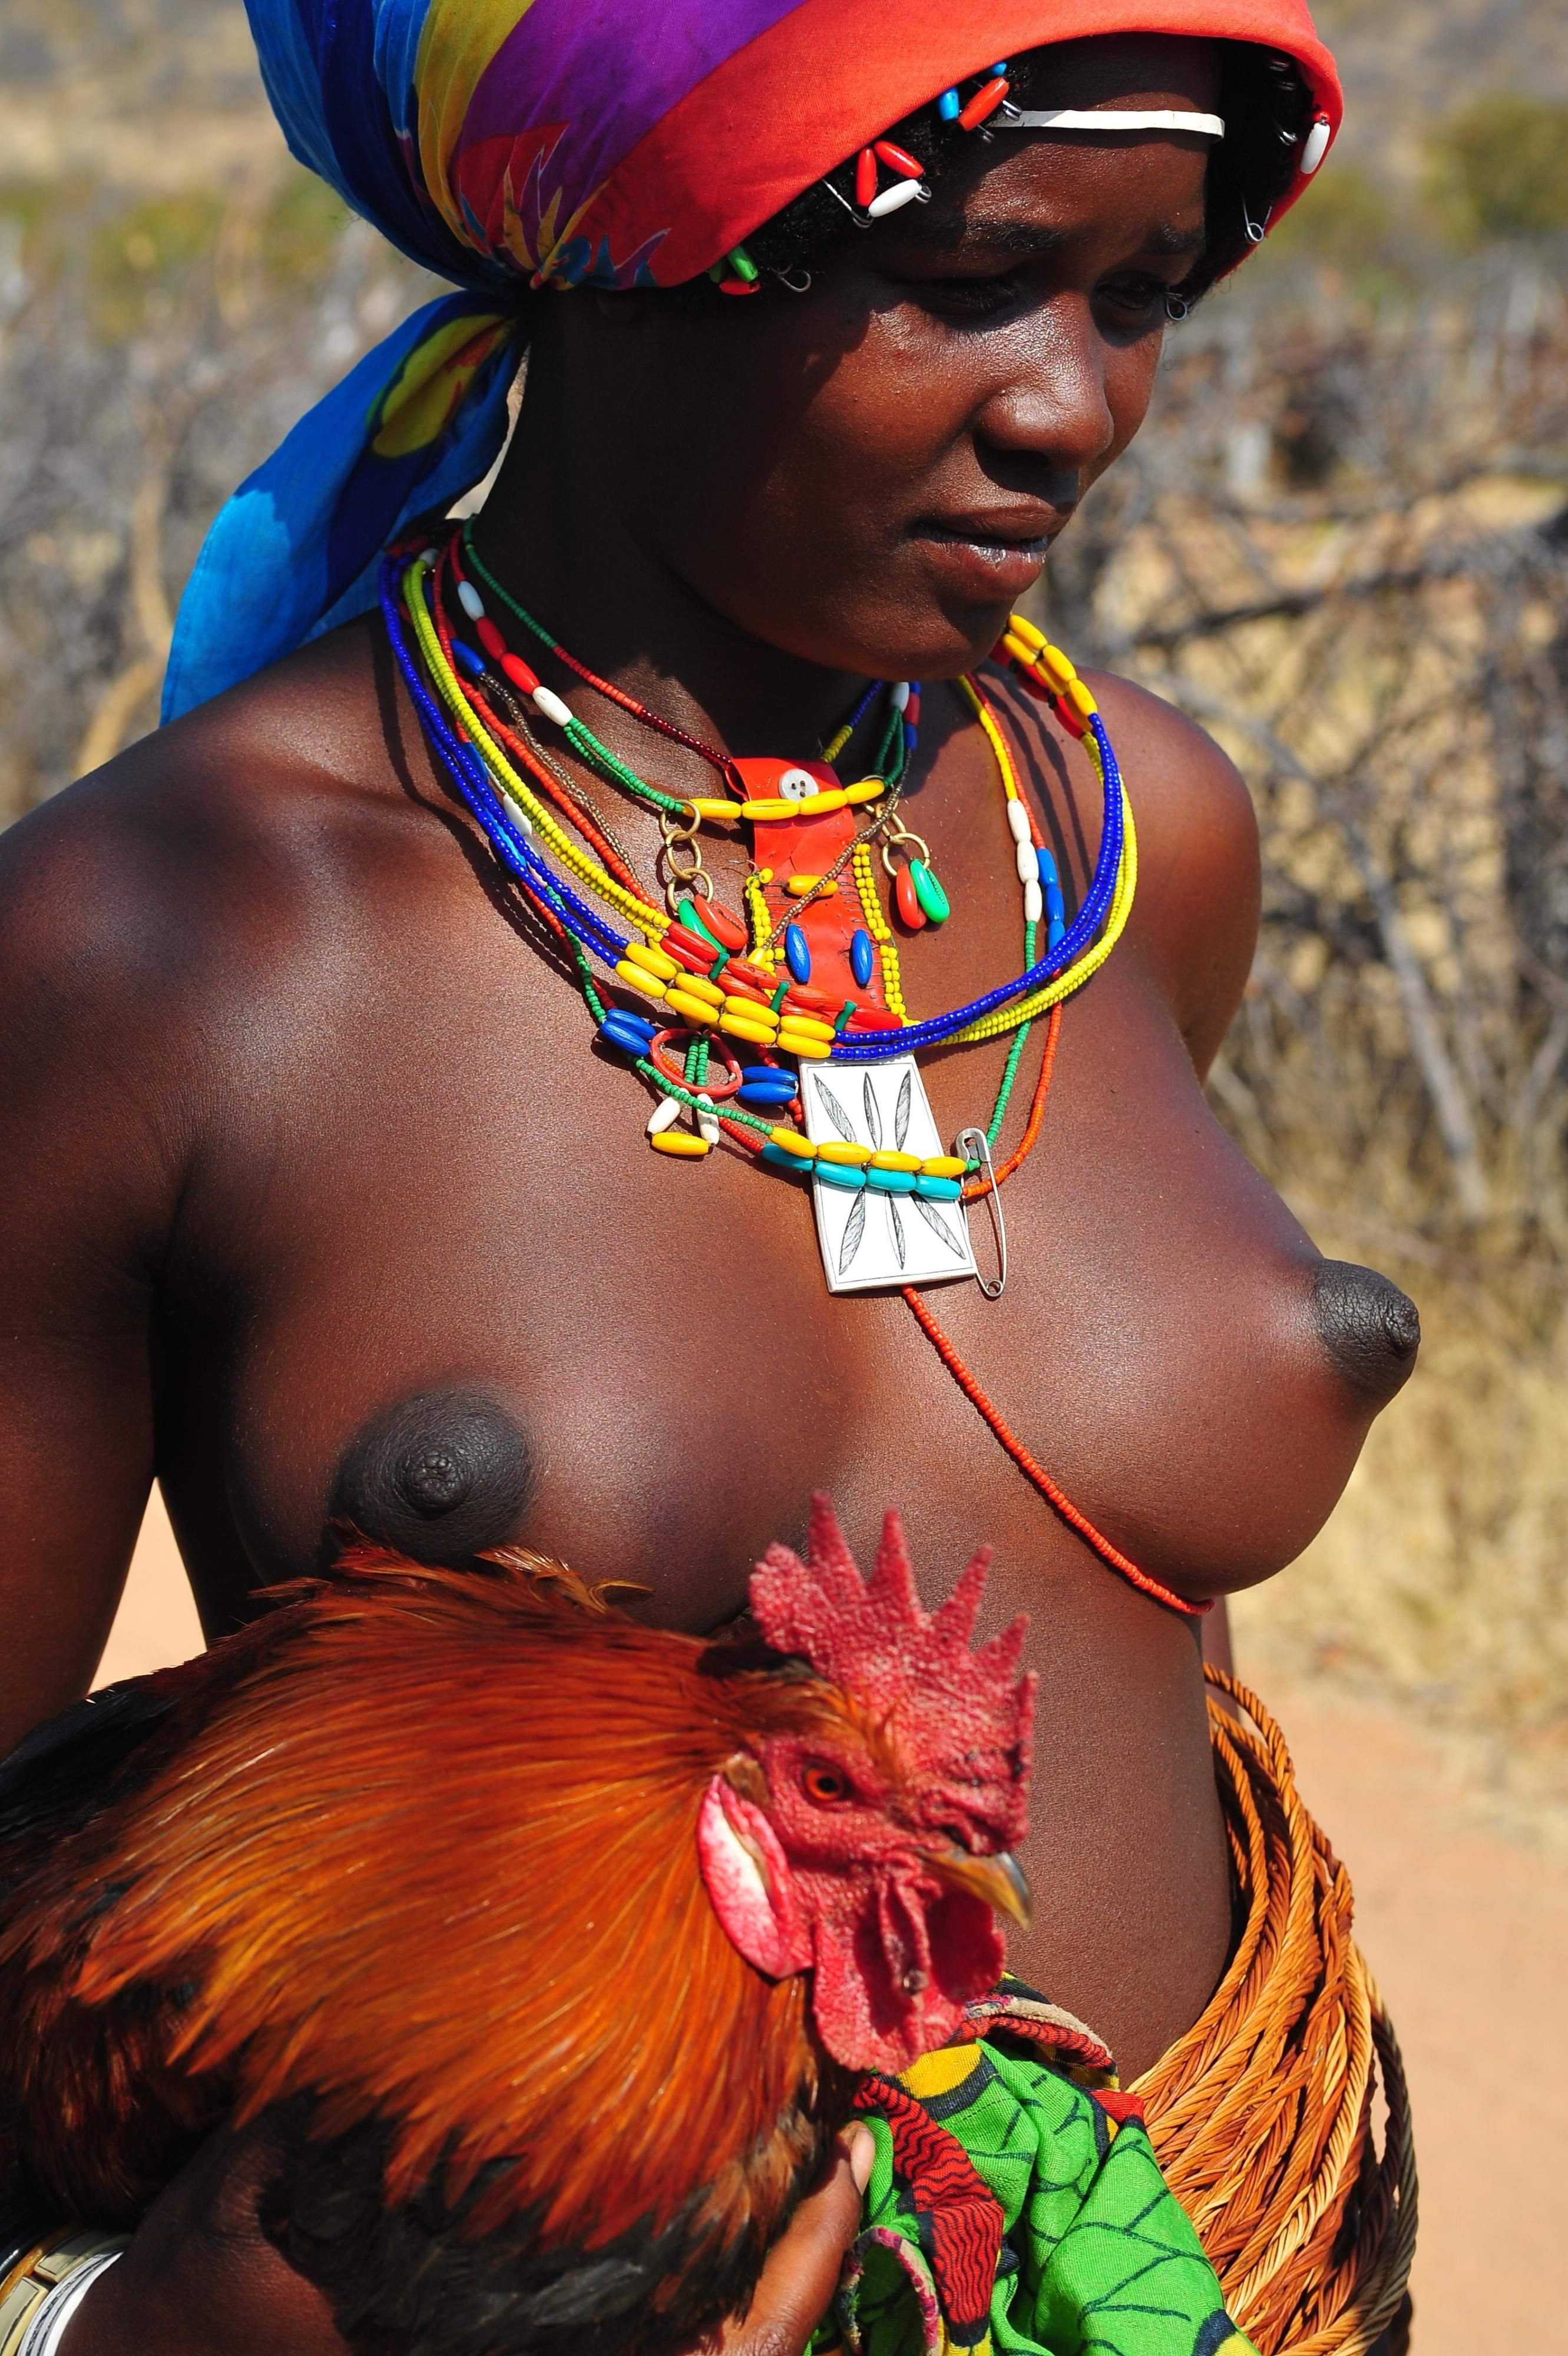 Naked African Tribal Girls Sex - African Tribal Girls Nude Boobs - 37 photos